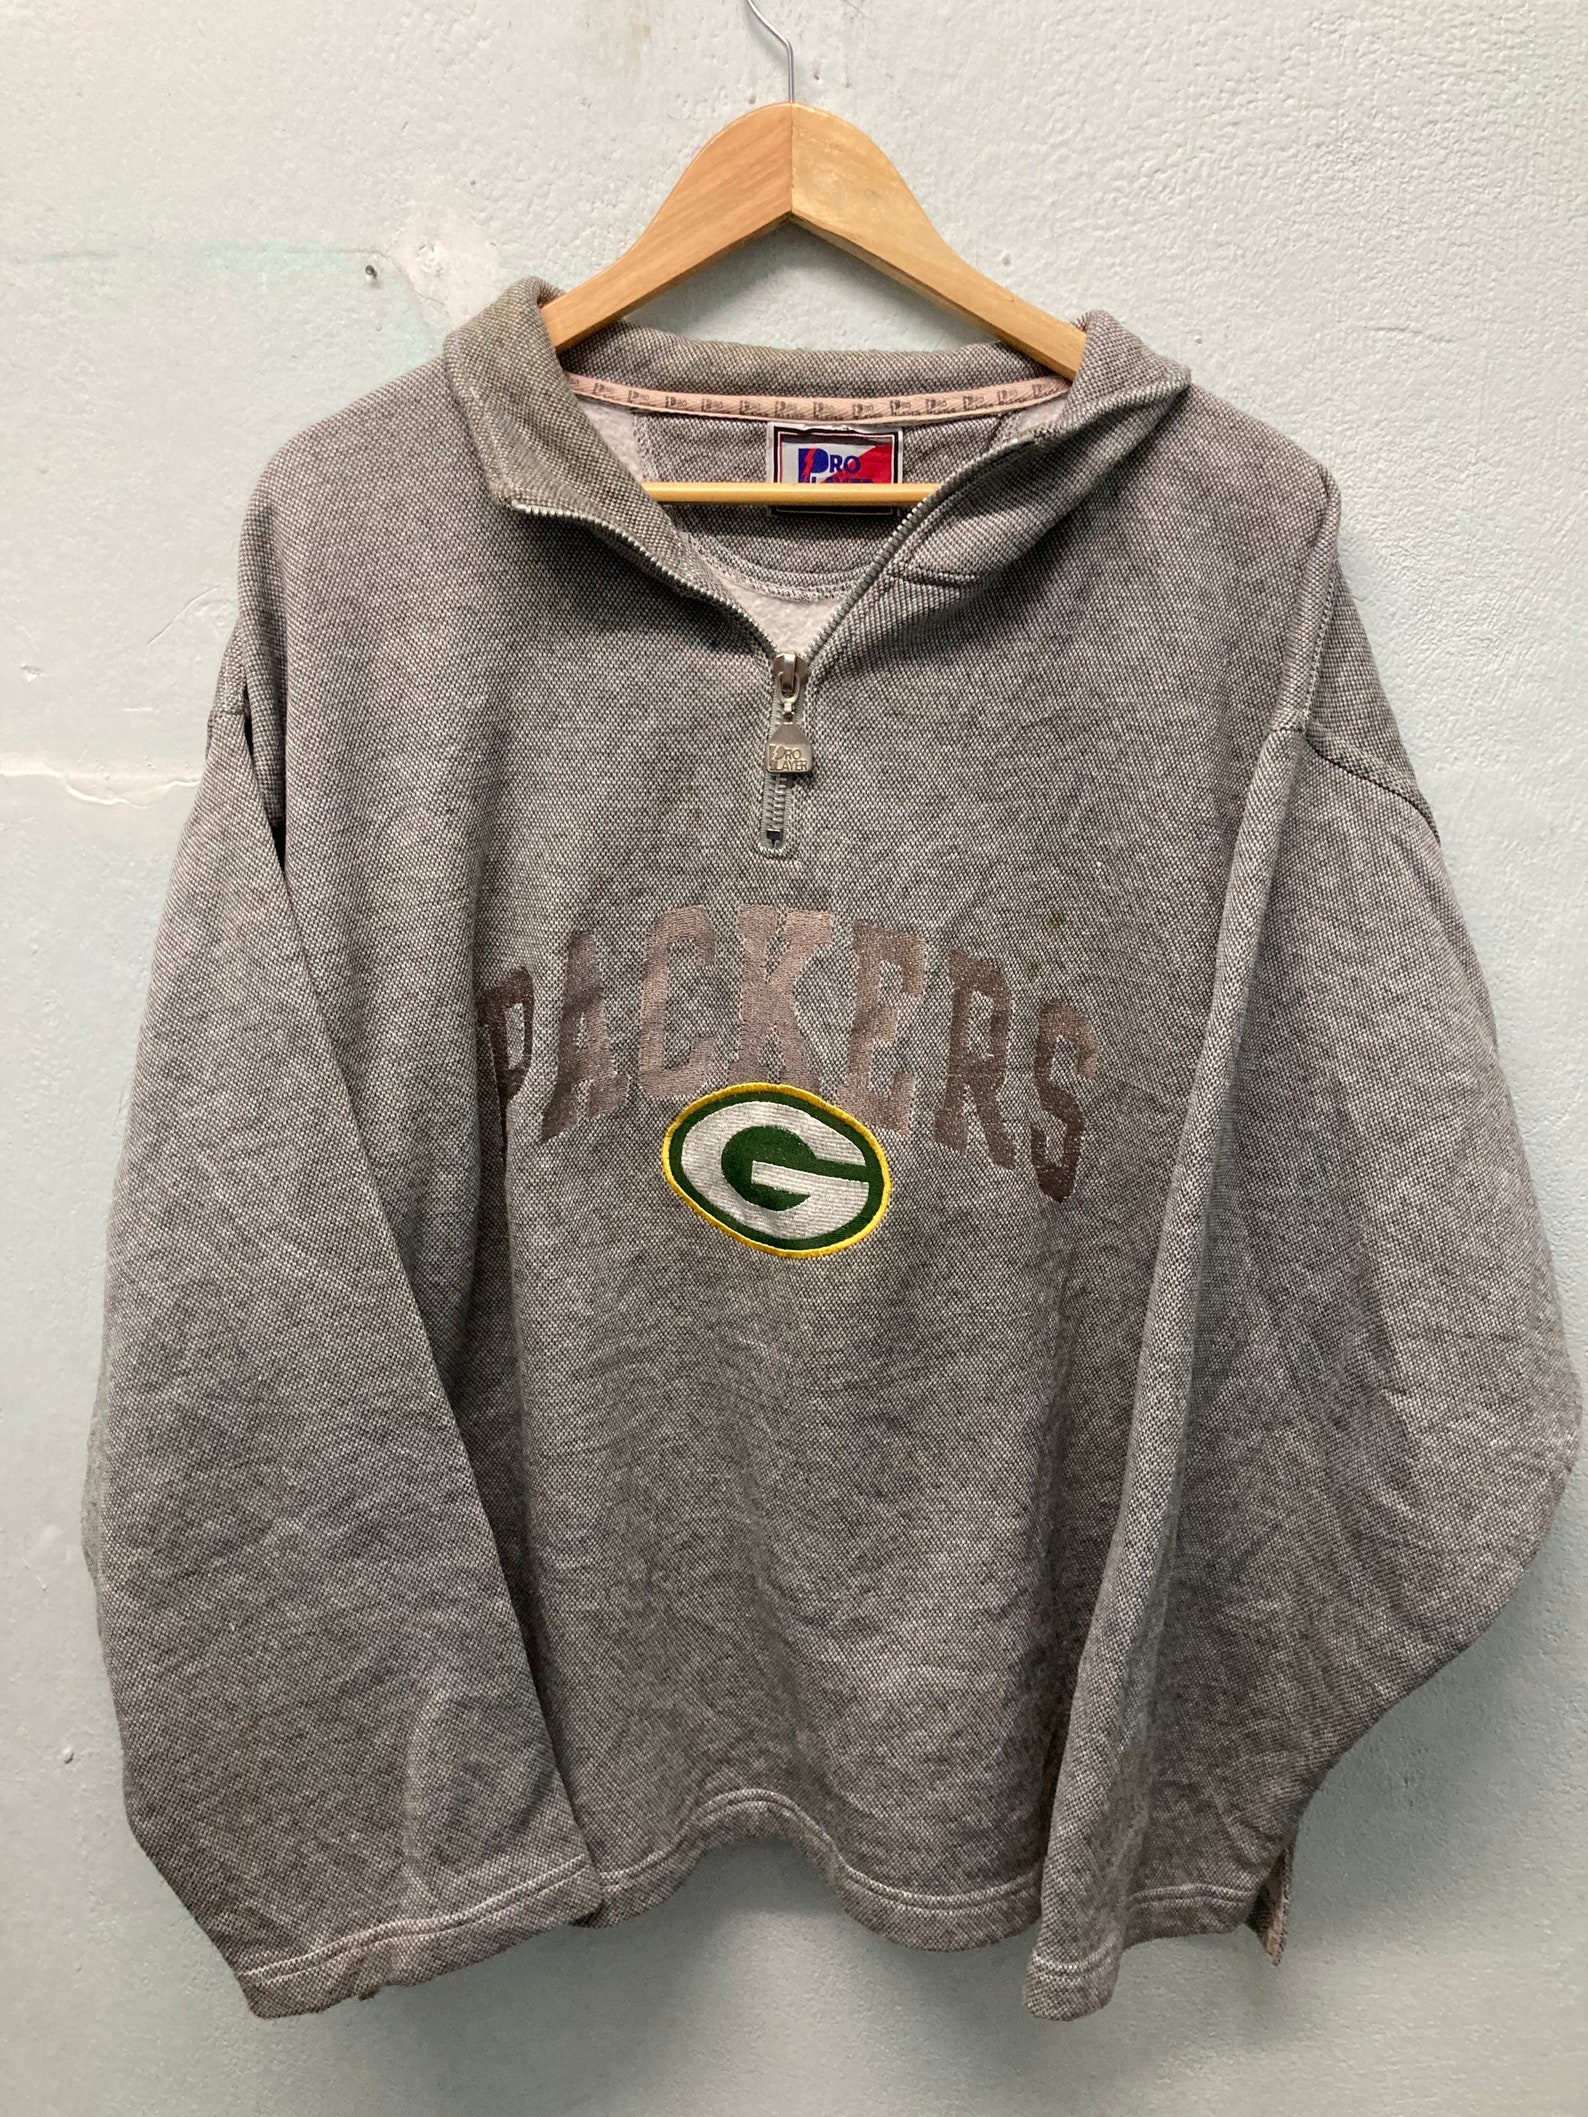 Vintage Green Bay Packers Sweater size XL | Etsy